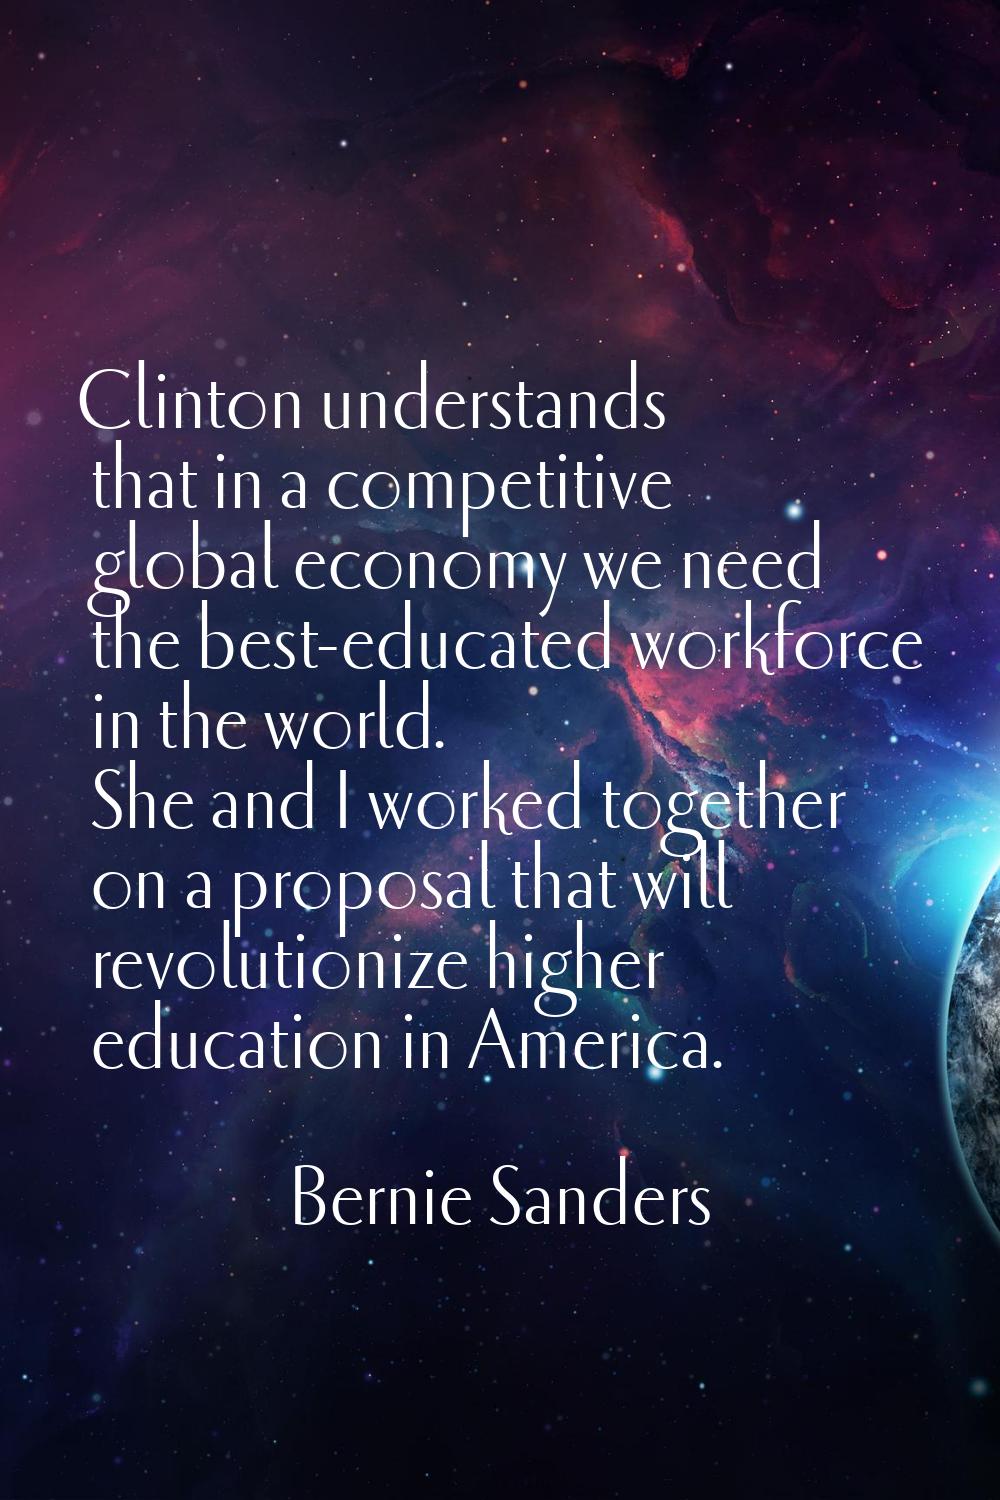 Clinton understands that in a competitive global economy we need the best-educated workforce in the